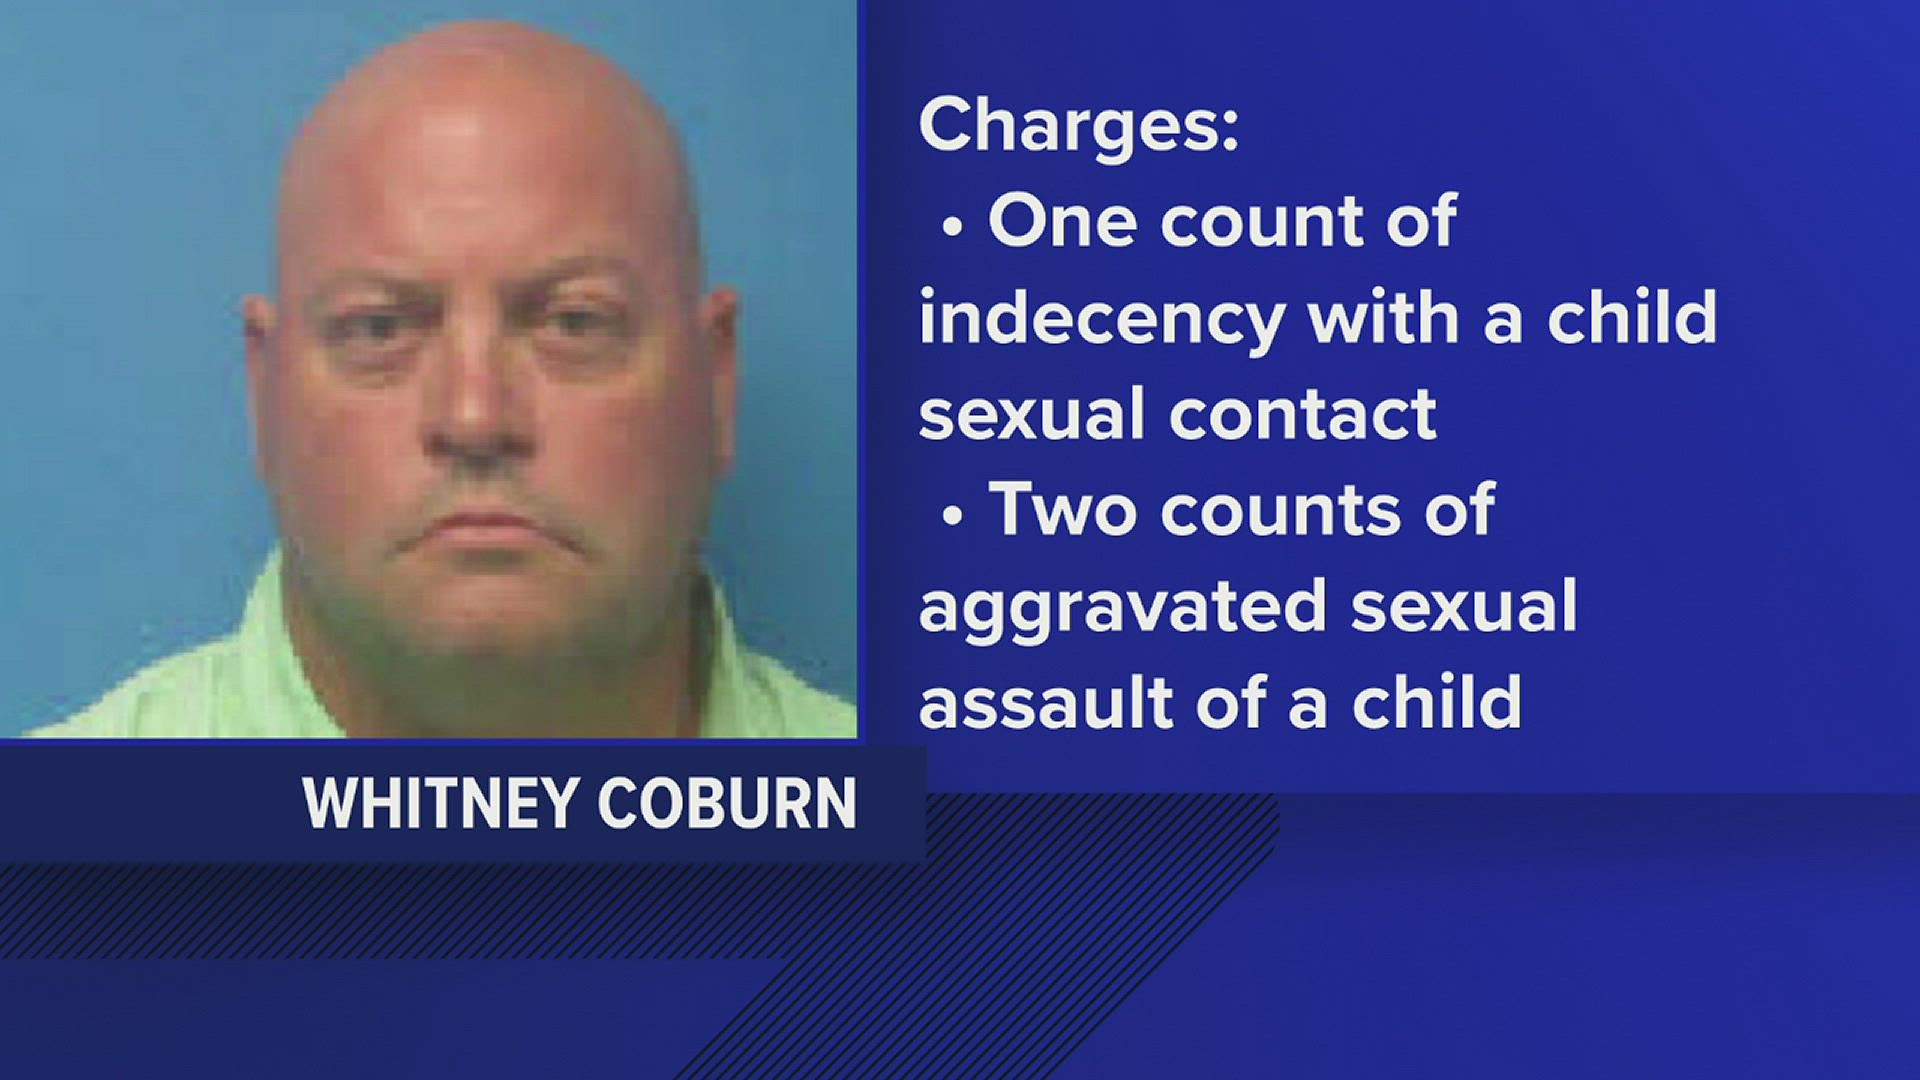 Whitney Ray Coburn is being held in the Hardin County Jail on bonds totaling $1.5 million.